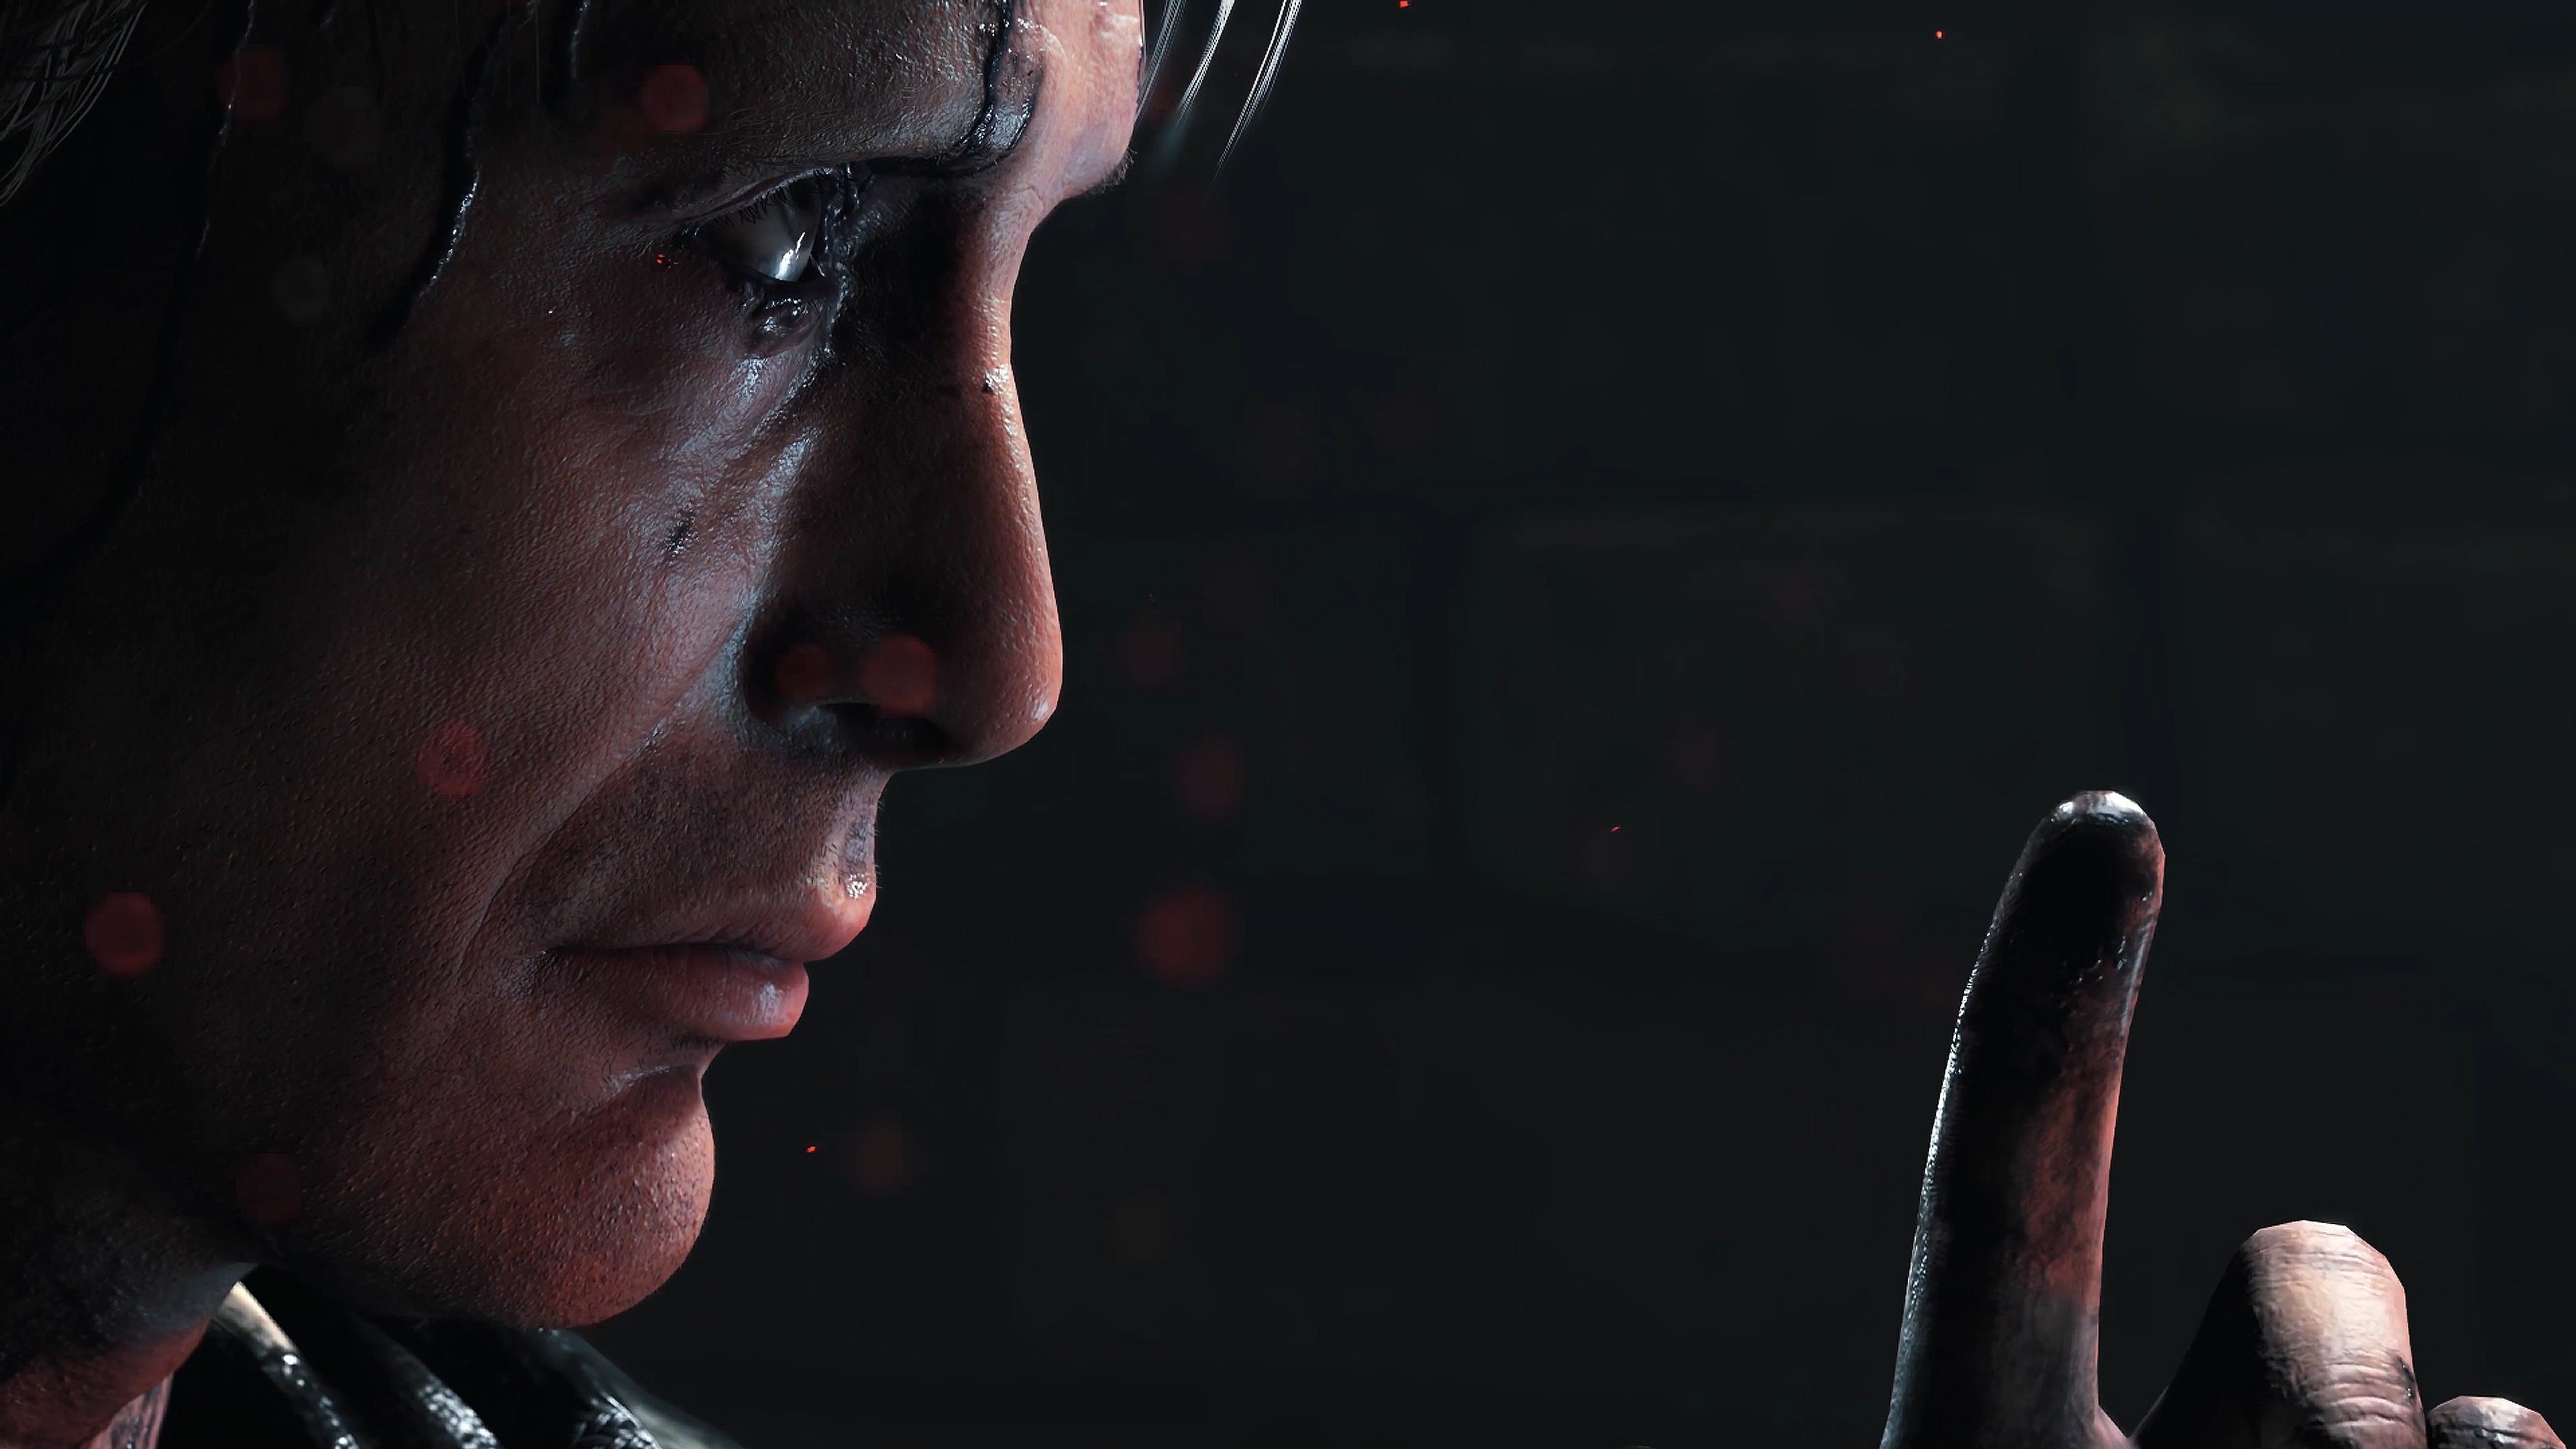 Mads Mikkelsen, Face, Video game characters, Hideo Kojima, Death Stranding, Horror, Video games Wallpaper